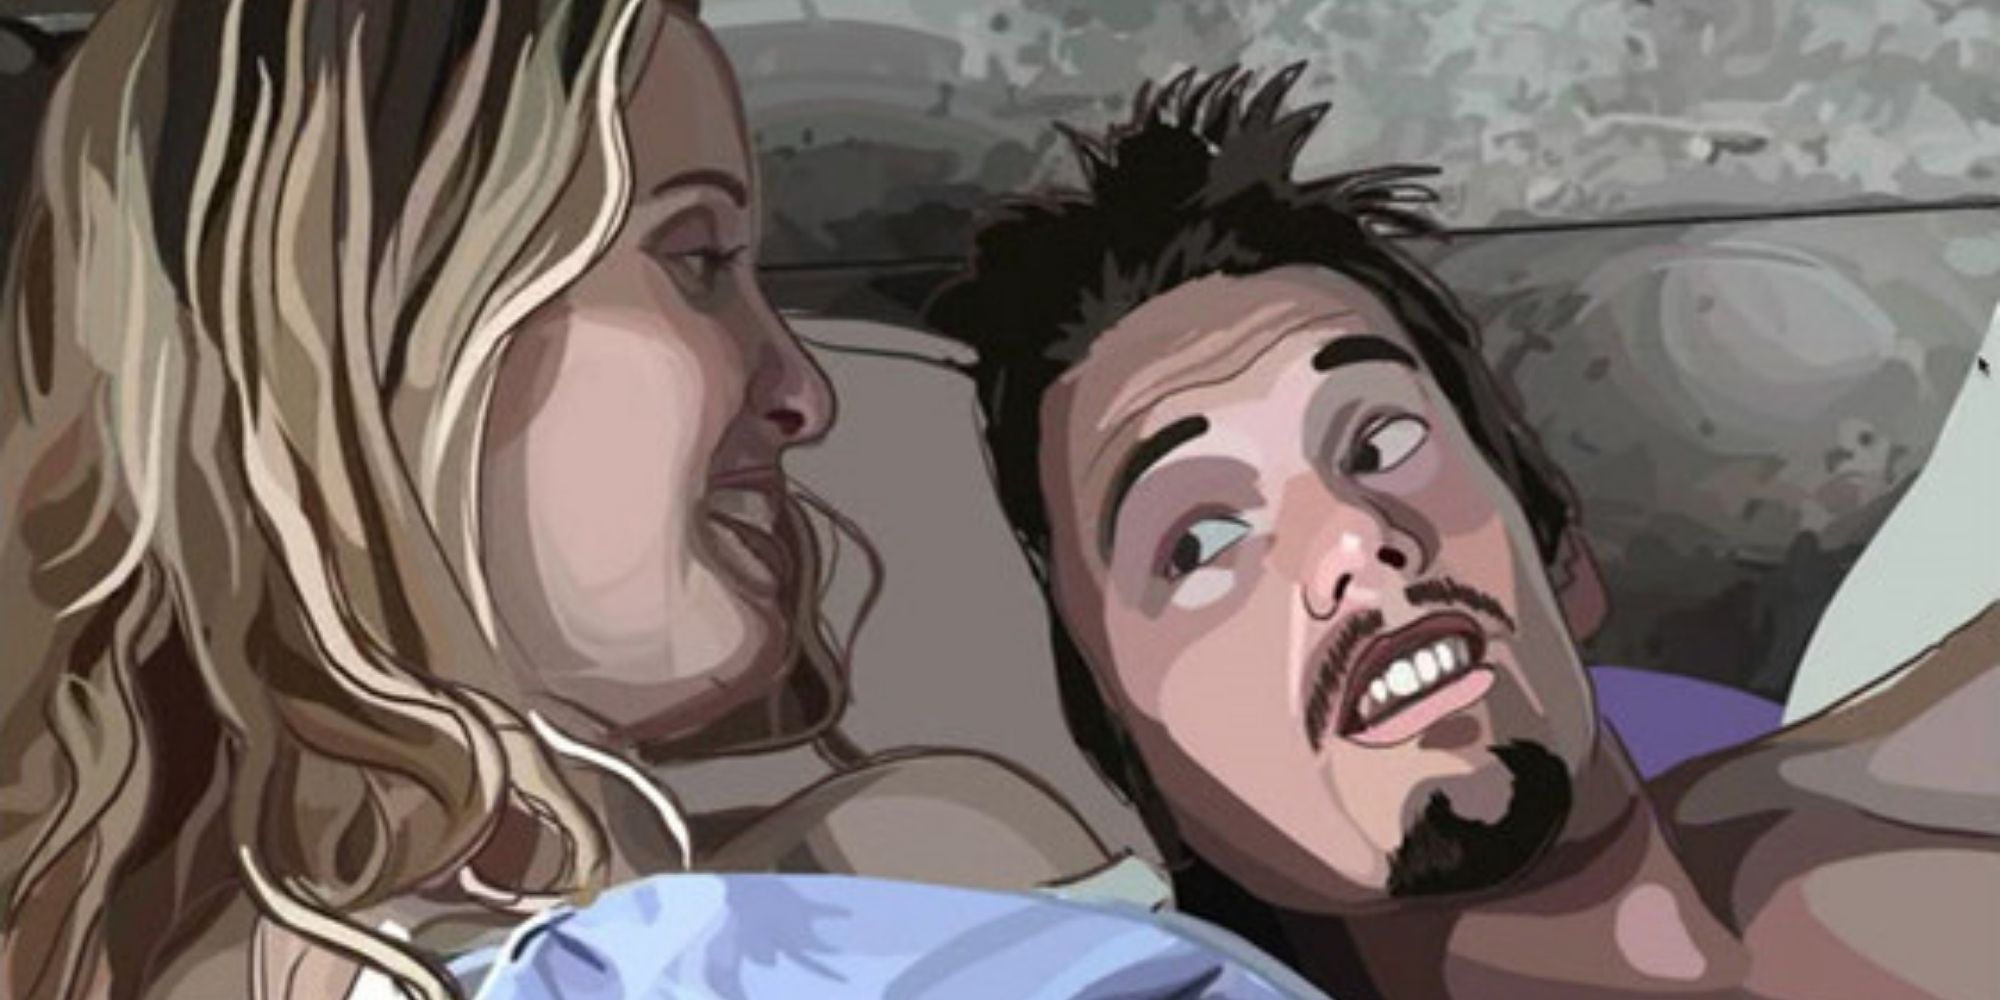 Jesse and Celine laying in bed in the animated film 'Waking Life'.